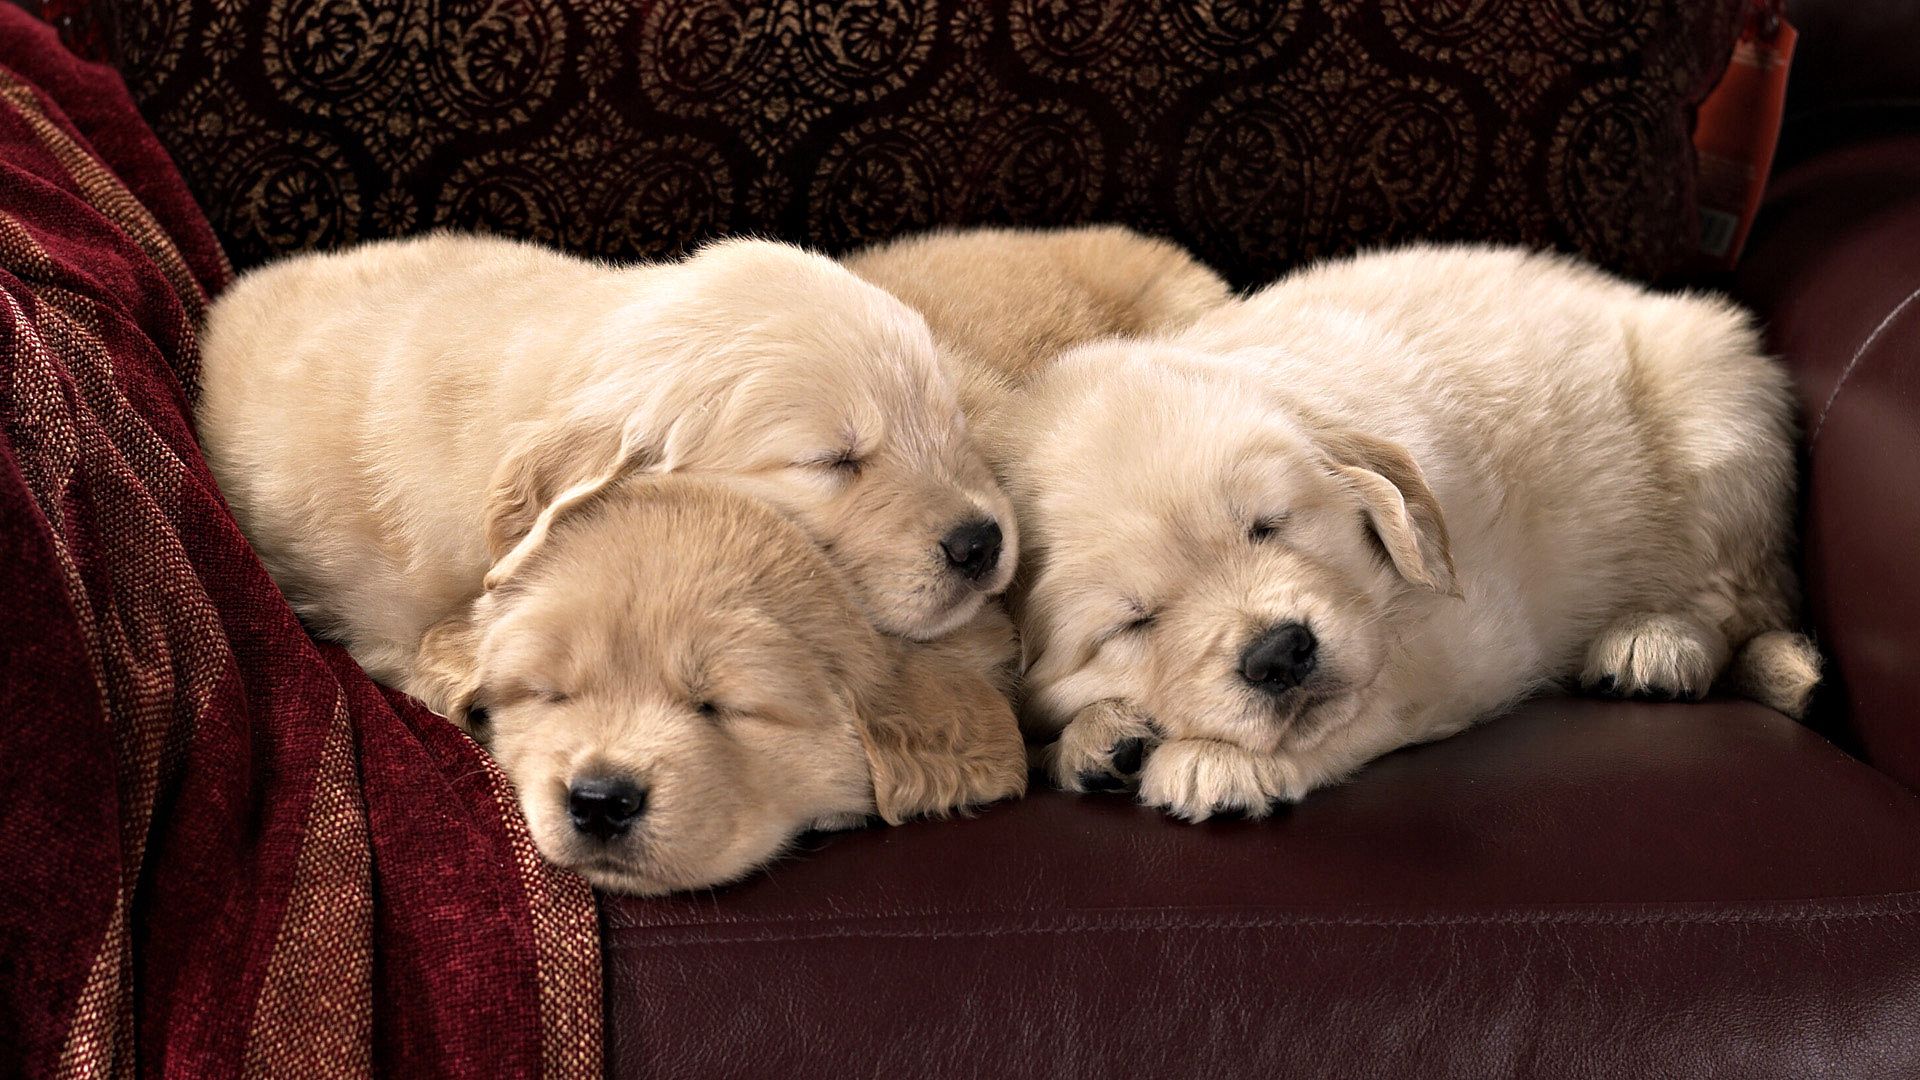 140674 Screensavers and Wallpapers Puppies for phone. Download animals, sleep, dream, toddlers, kids, labradors, puppies pictures for free